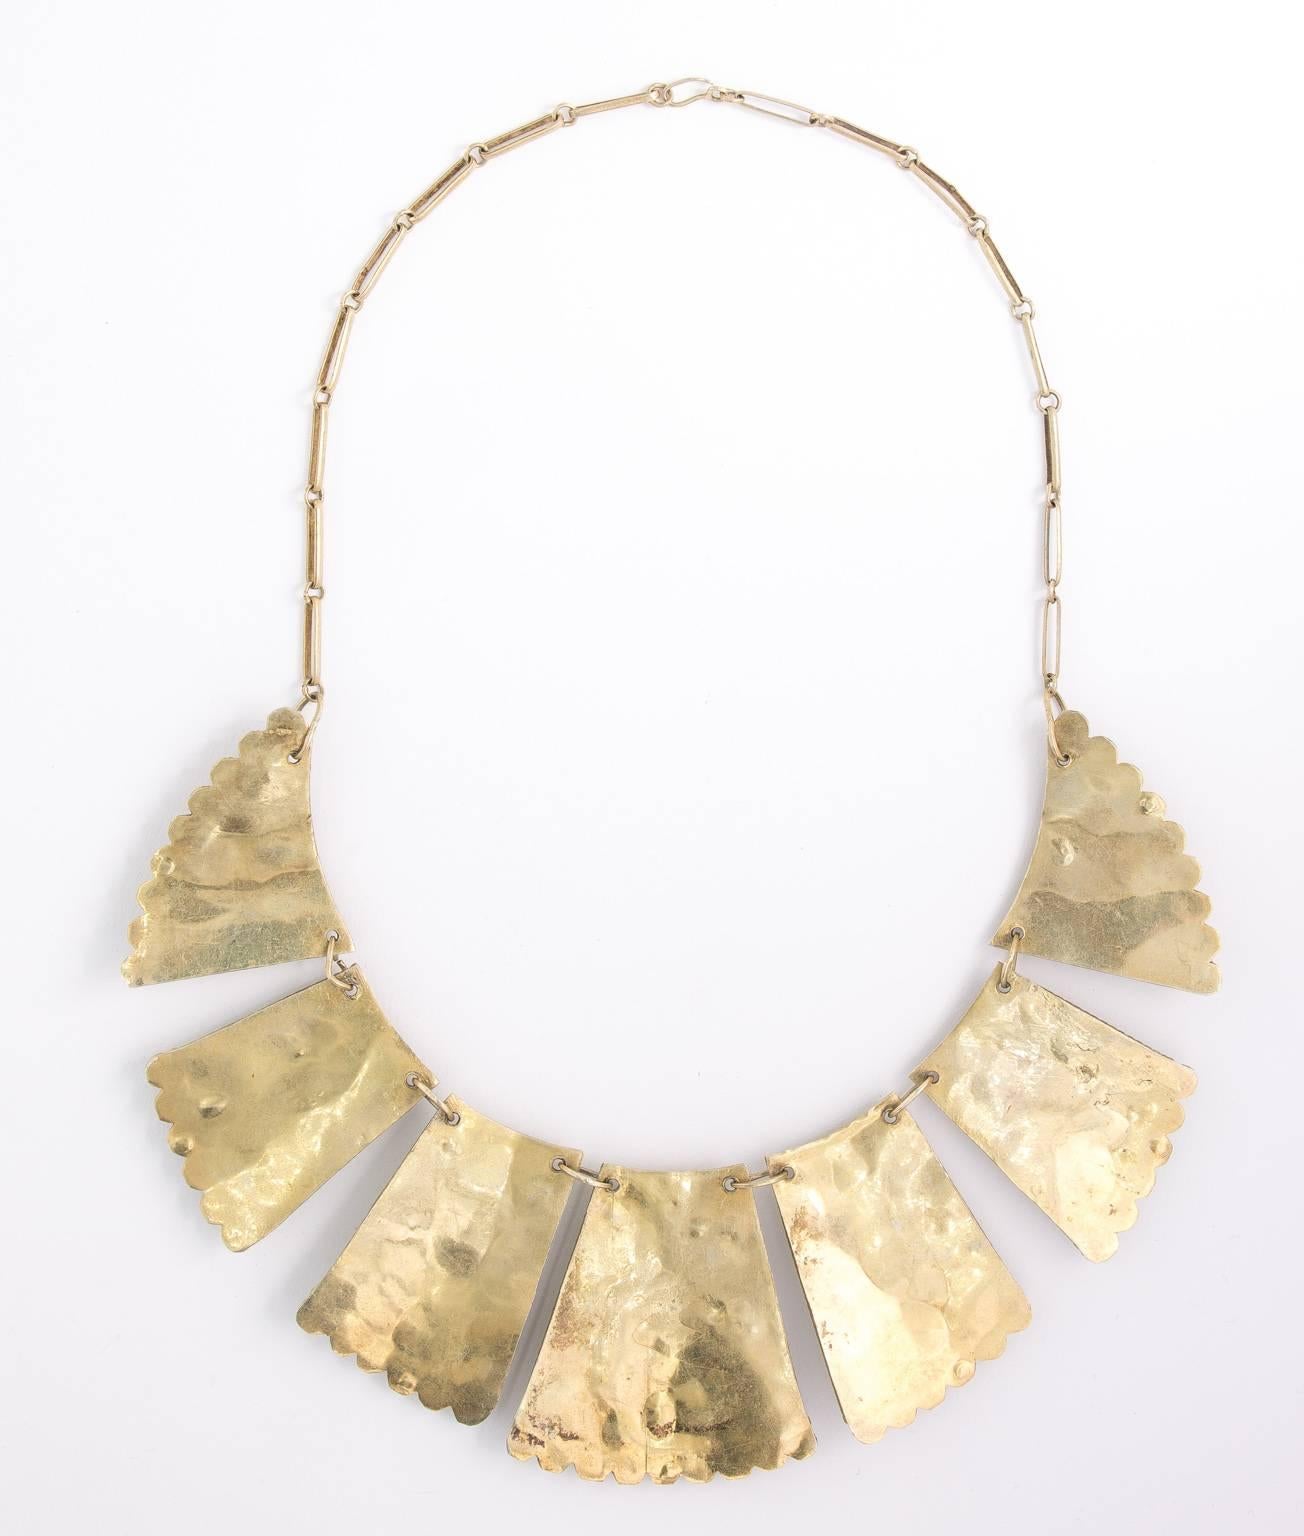 Spectacular bib necklace from Persia. Vintage silver gilt hand made with Persian turquoise.
PERIOD:1890-1920
FINISH:Gilt
